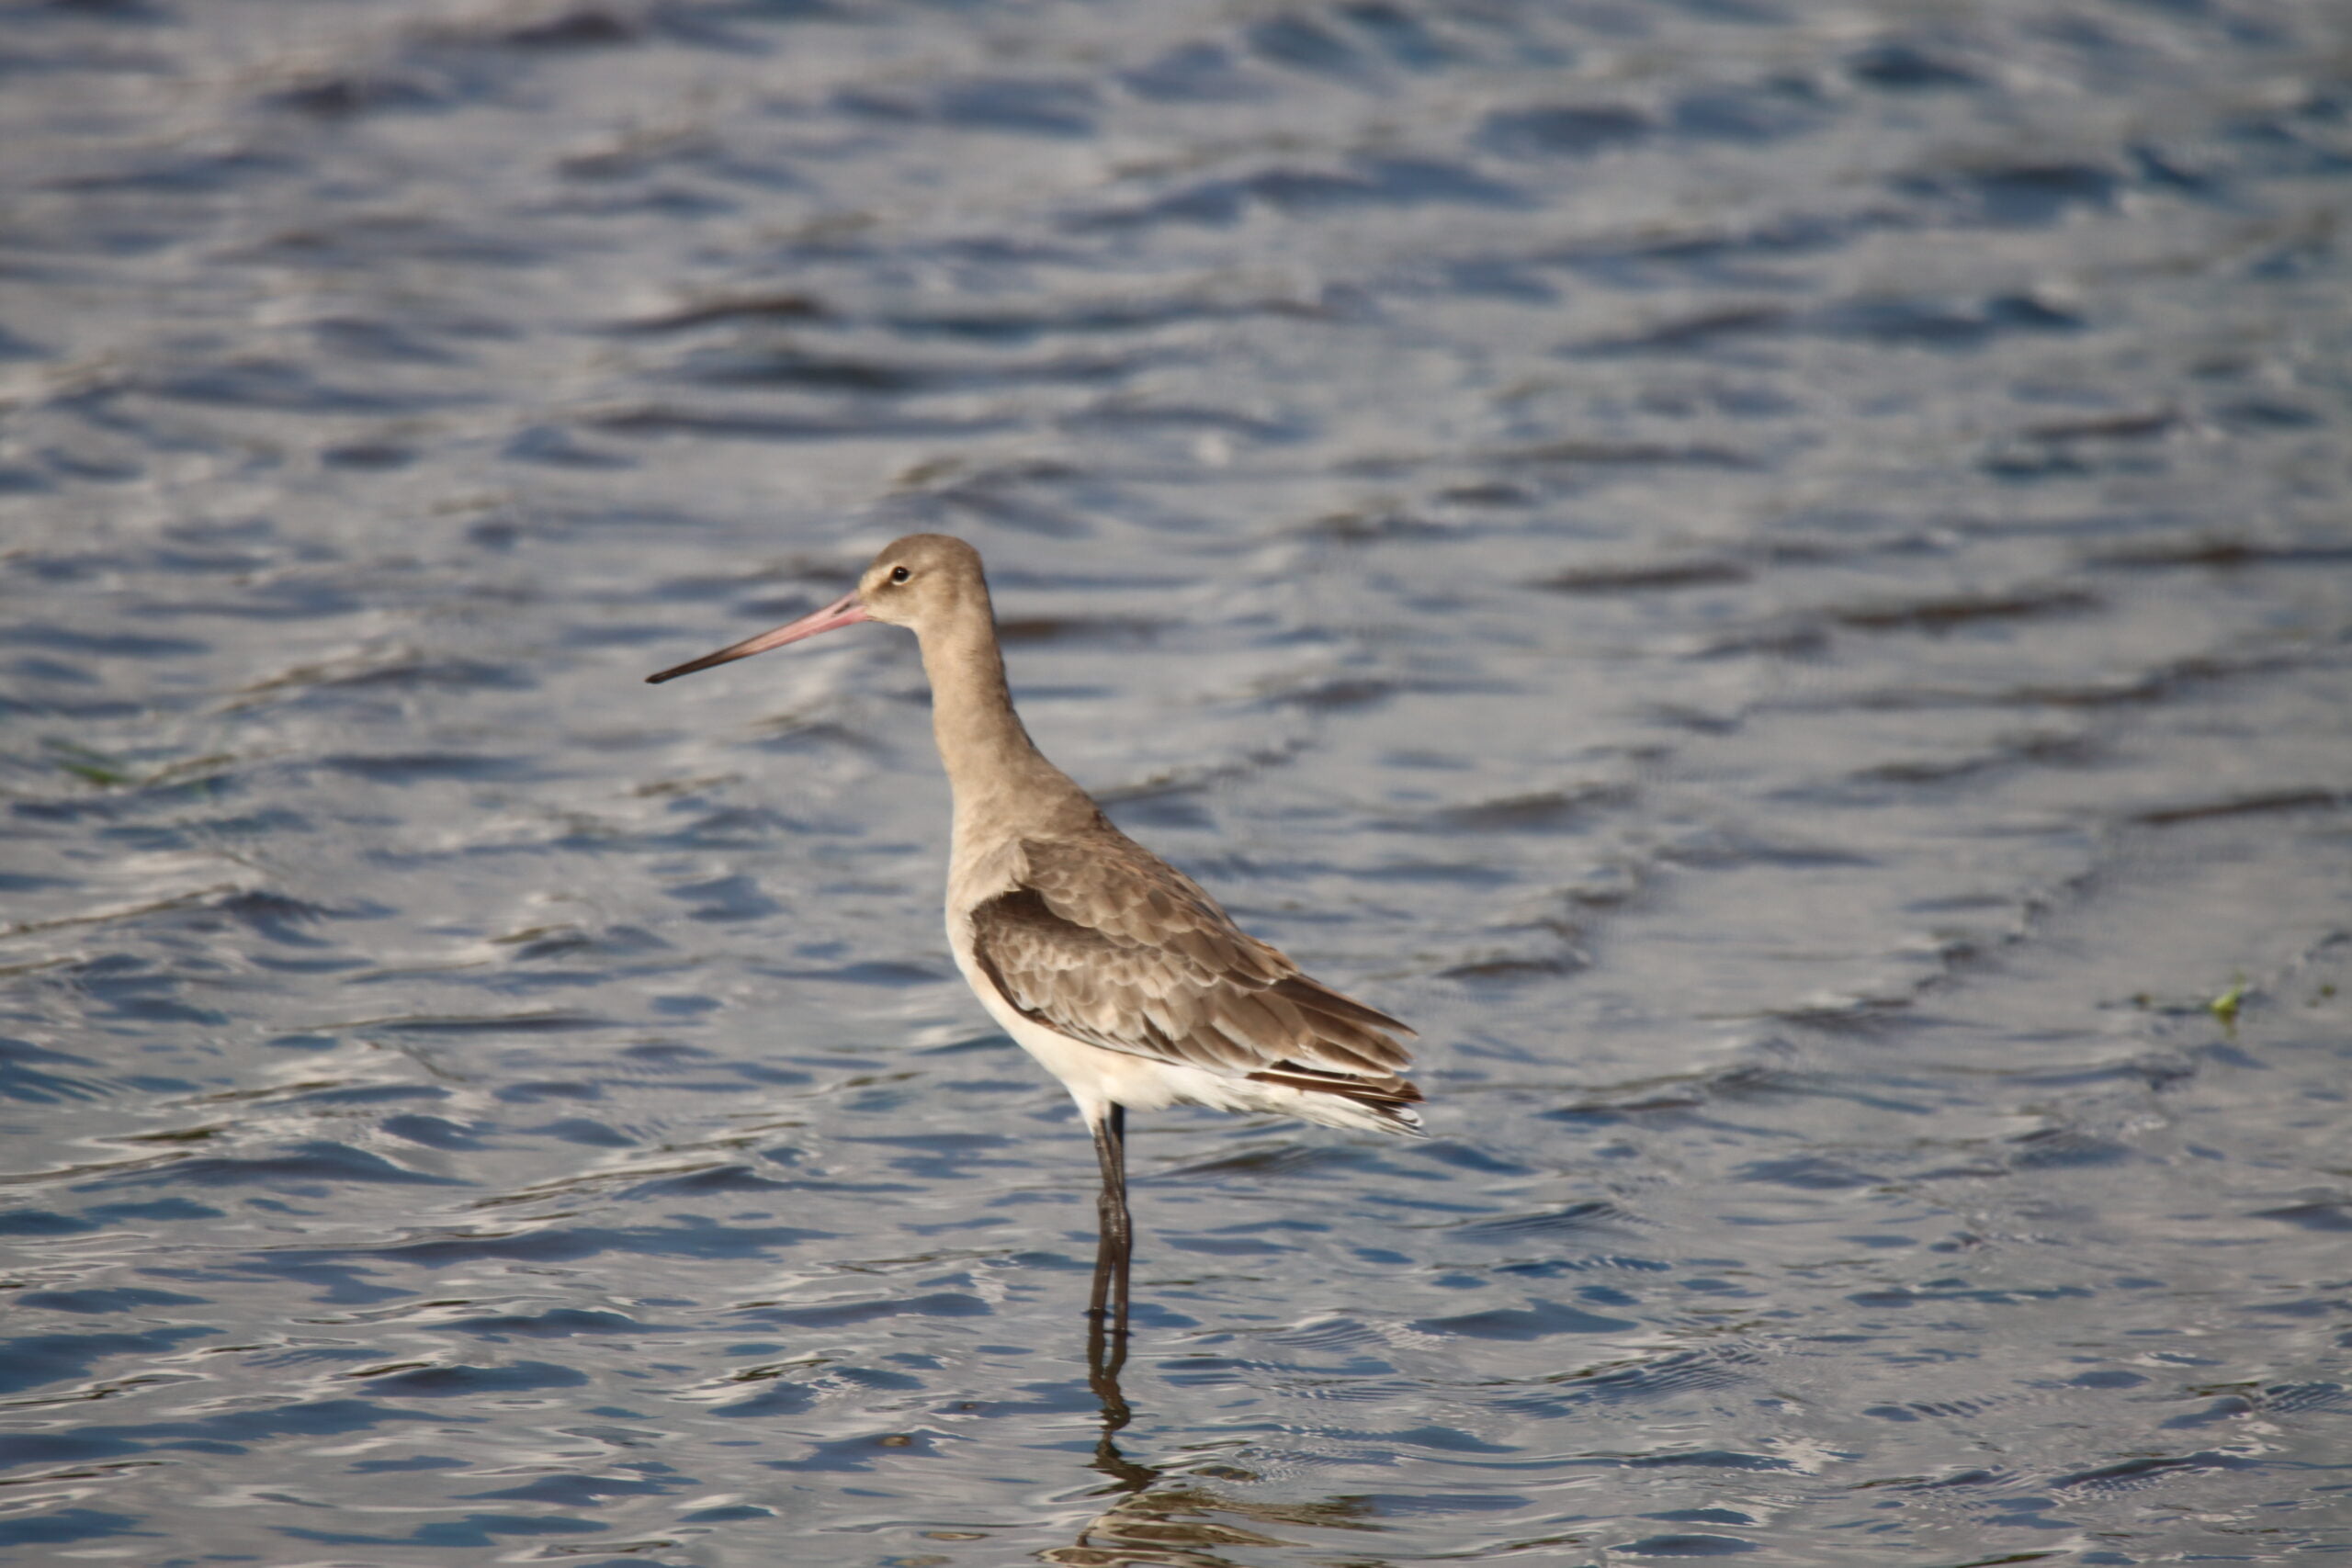 Black Tailed Godwit › wanderscapes365